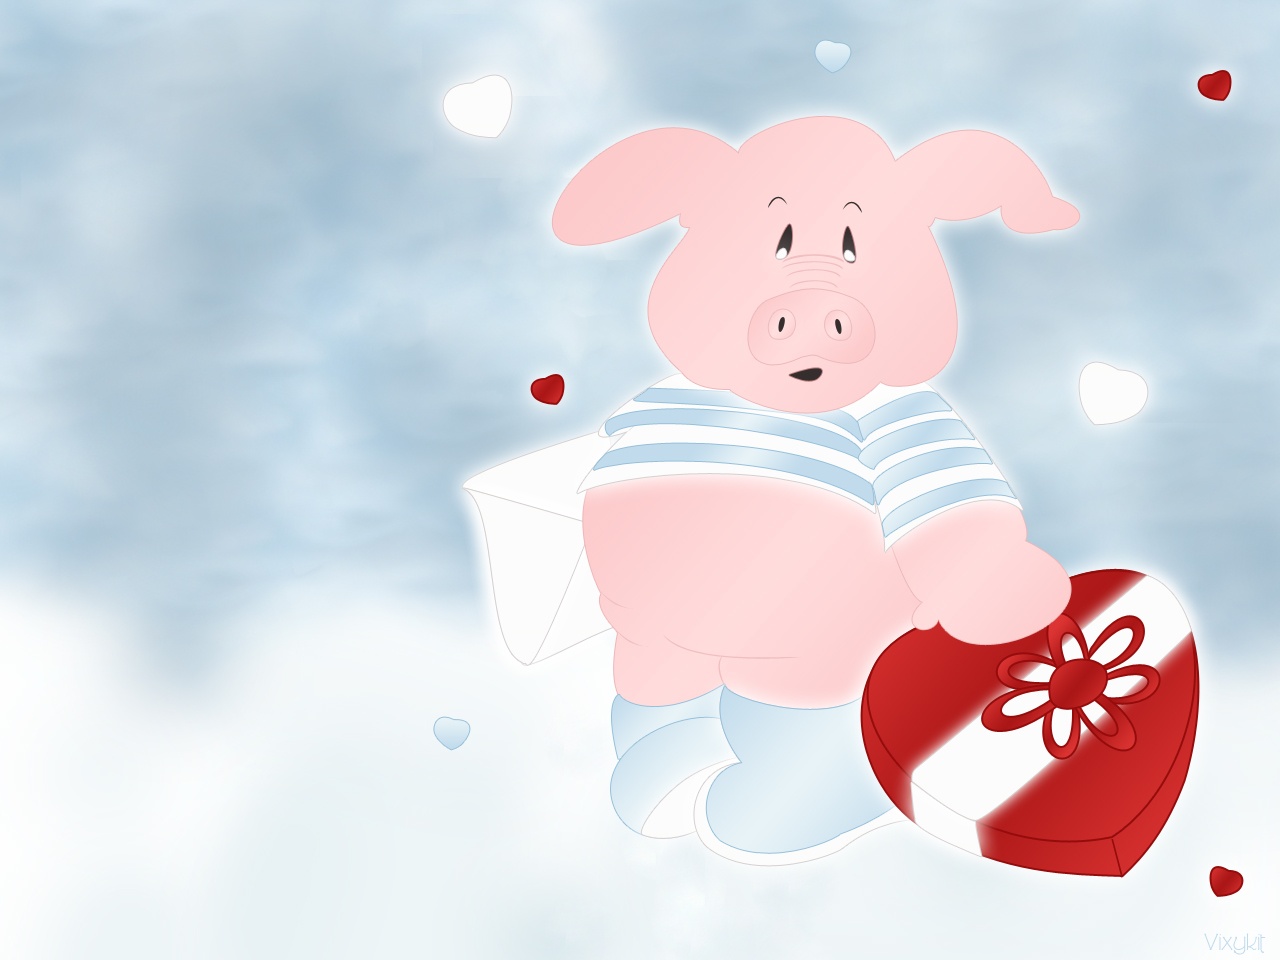 Pink pig with heart wallpaper. Pink pig with heart